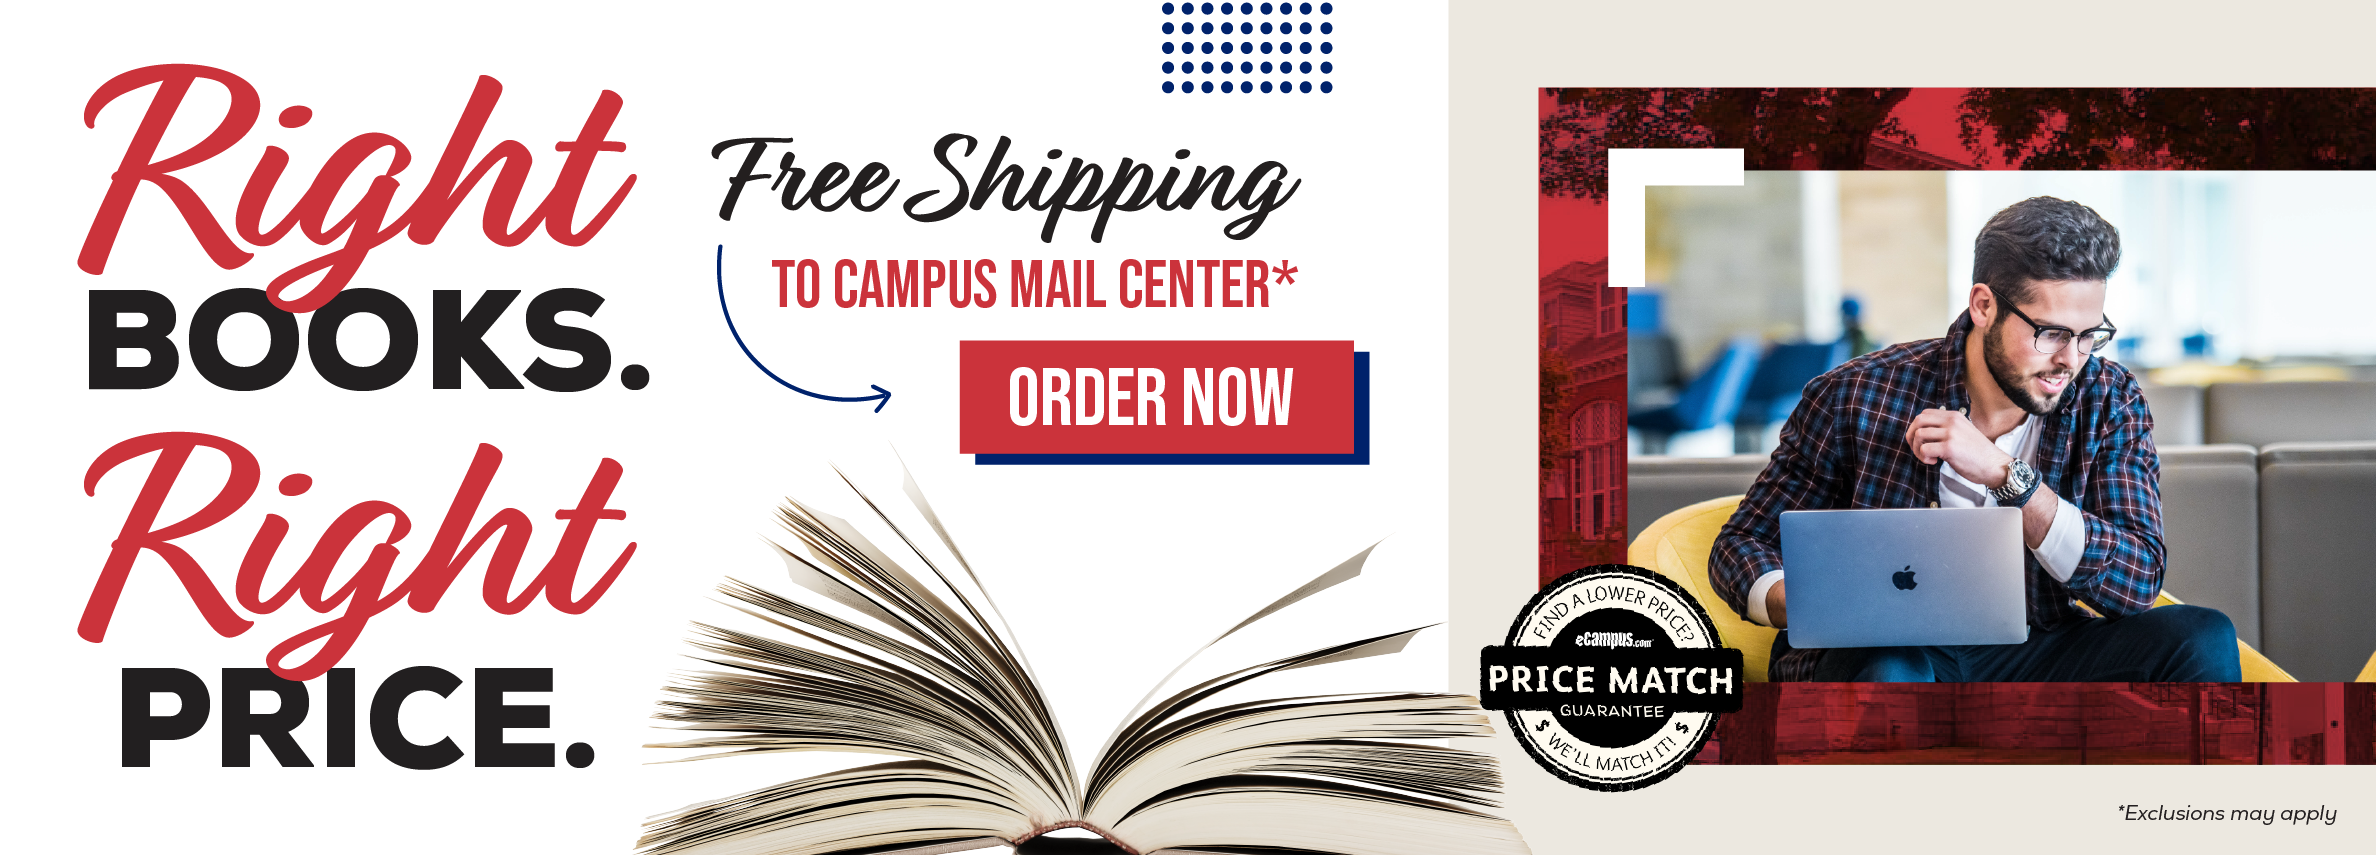 Right books. Right price. Free shipping to the campus mail center.* Order now. Price Match Guarantee. *Exclusions may apply.